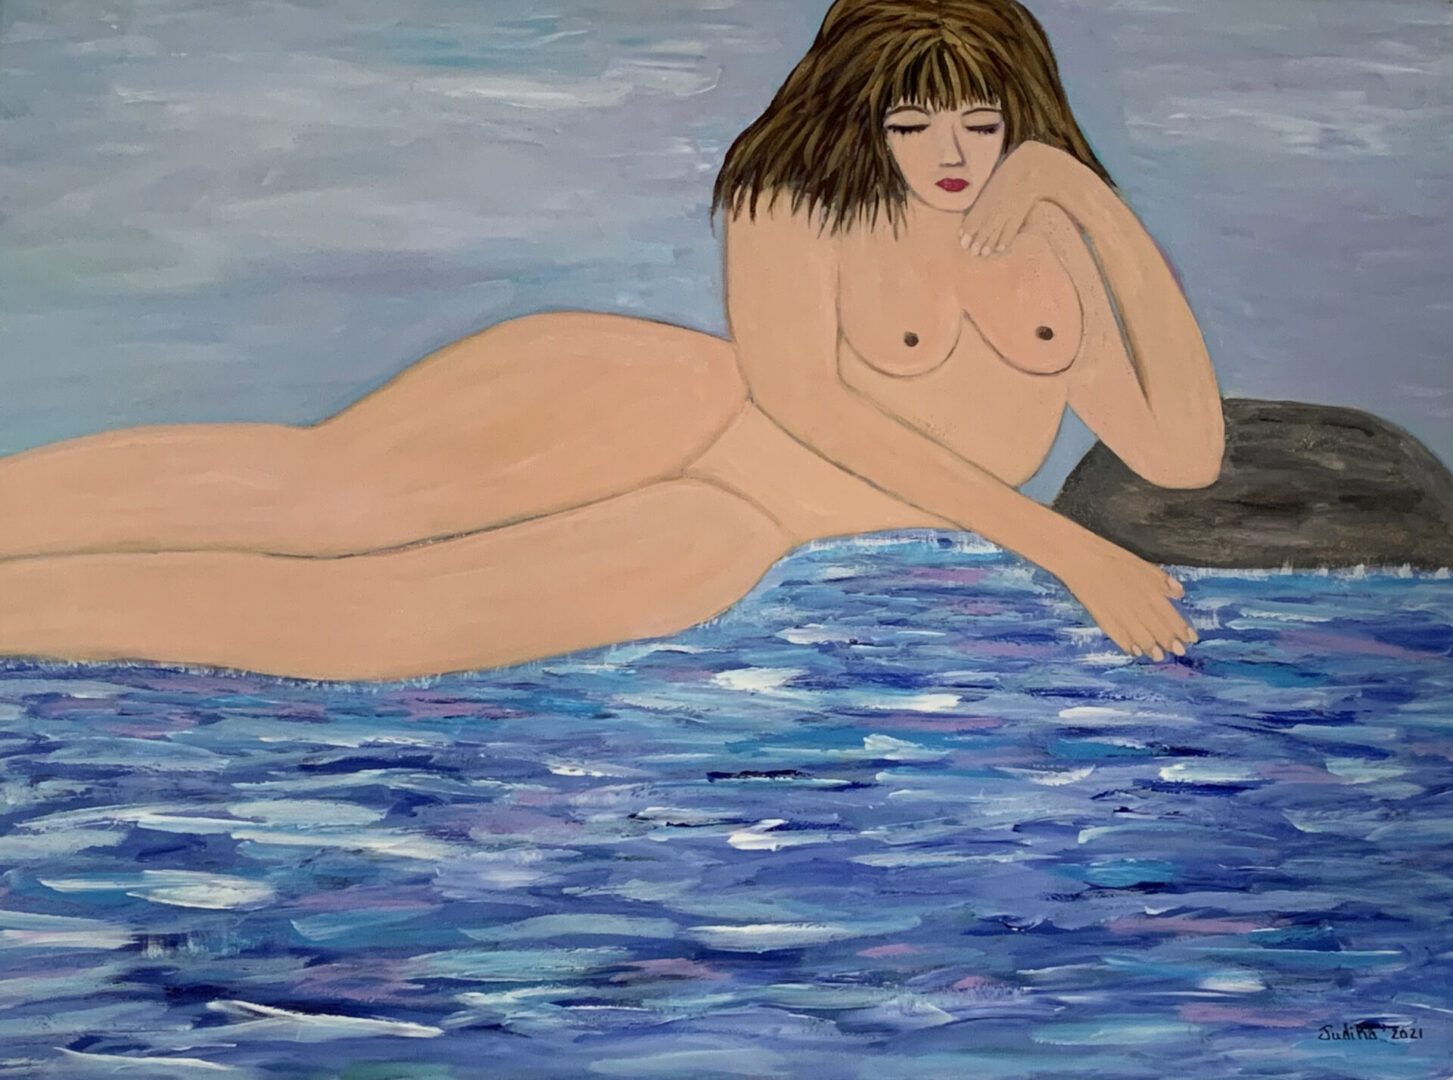 Art work of a naked girl is Meditating in water